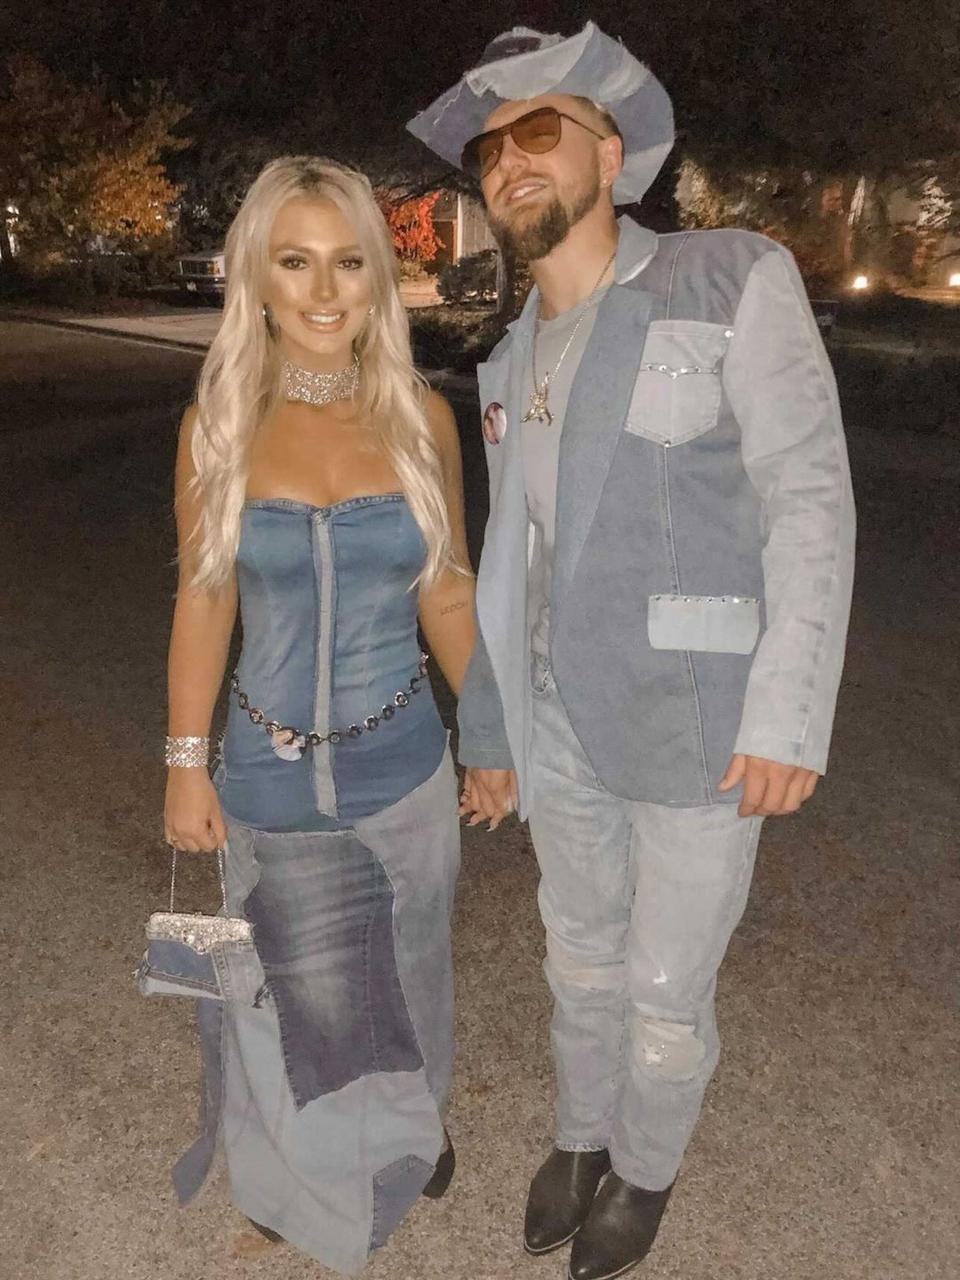 A couple dressed as Britney Spears and Justin Timberlake in their infamous all-denim looks pose for a photo.